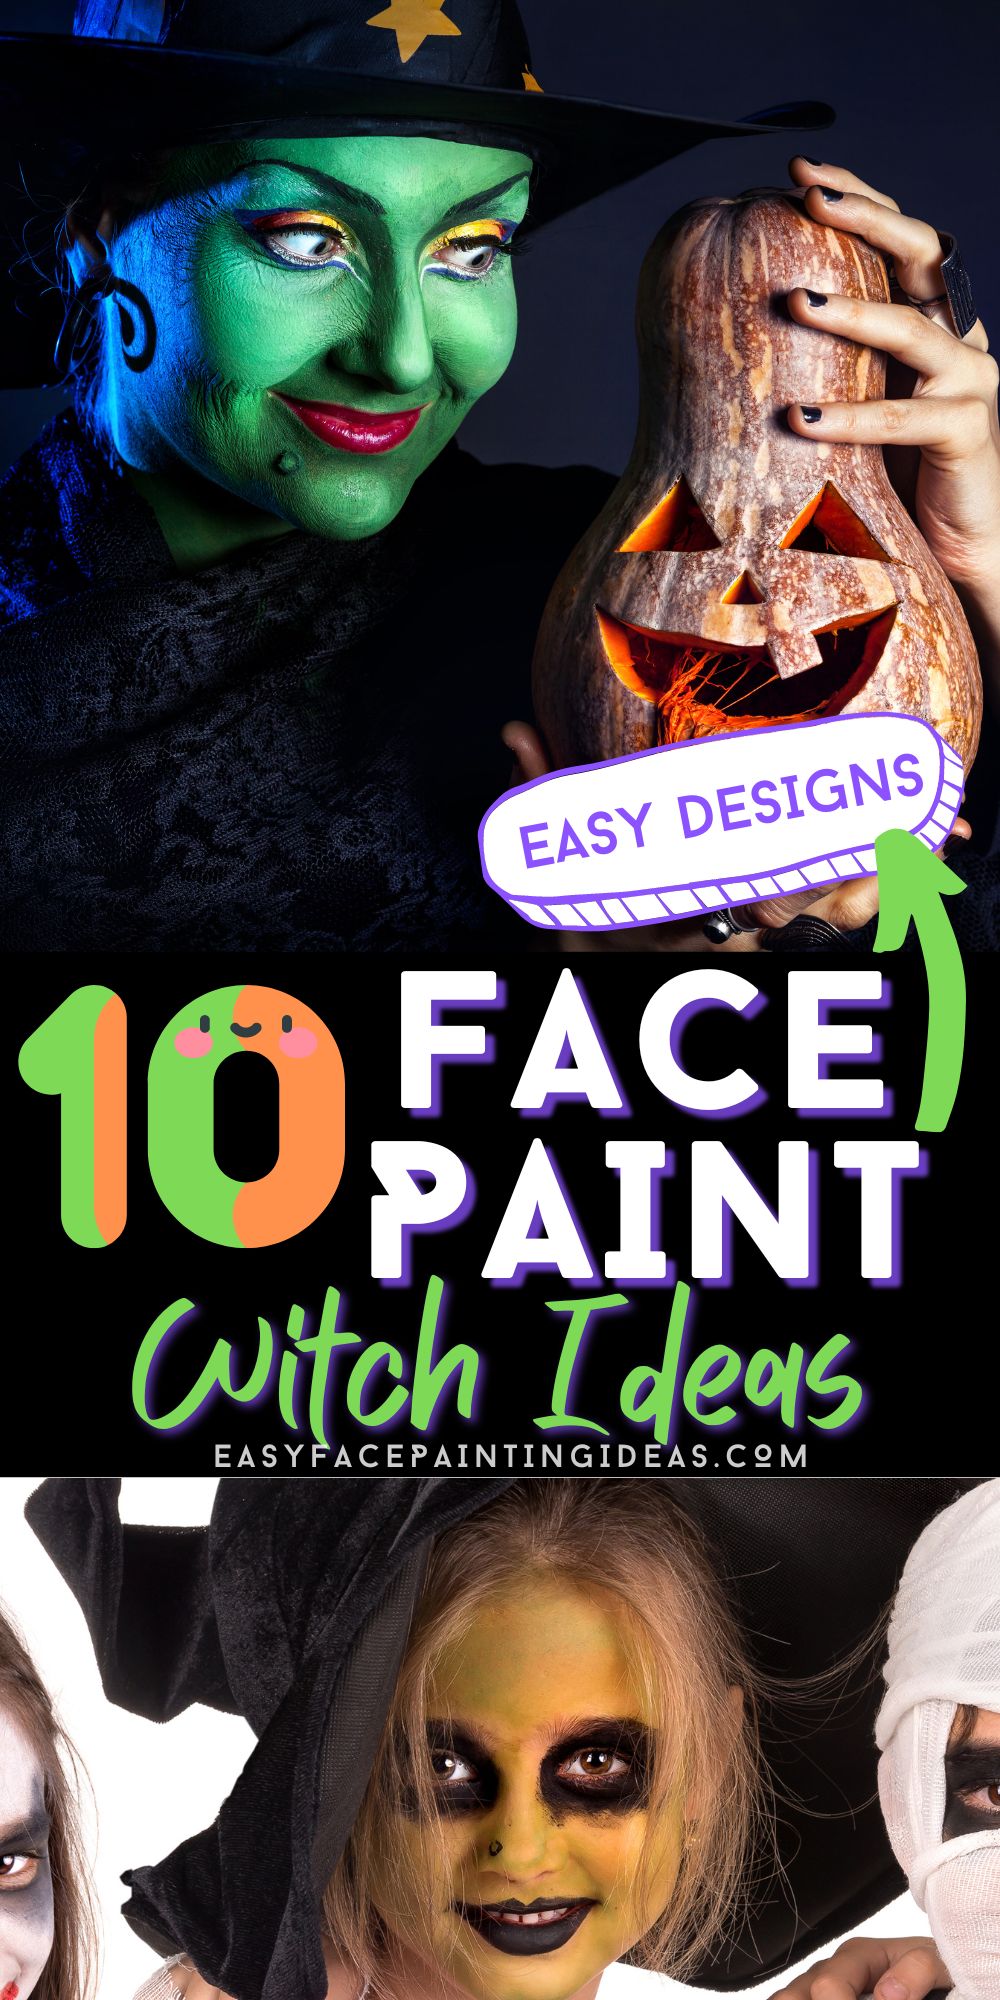 one photo of a woman whose face is painted like a green witch, and another photo of a child whose face is painted yellow and black, like a witch. An overlay reads, "10 face paint witch ideas: easy designs"